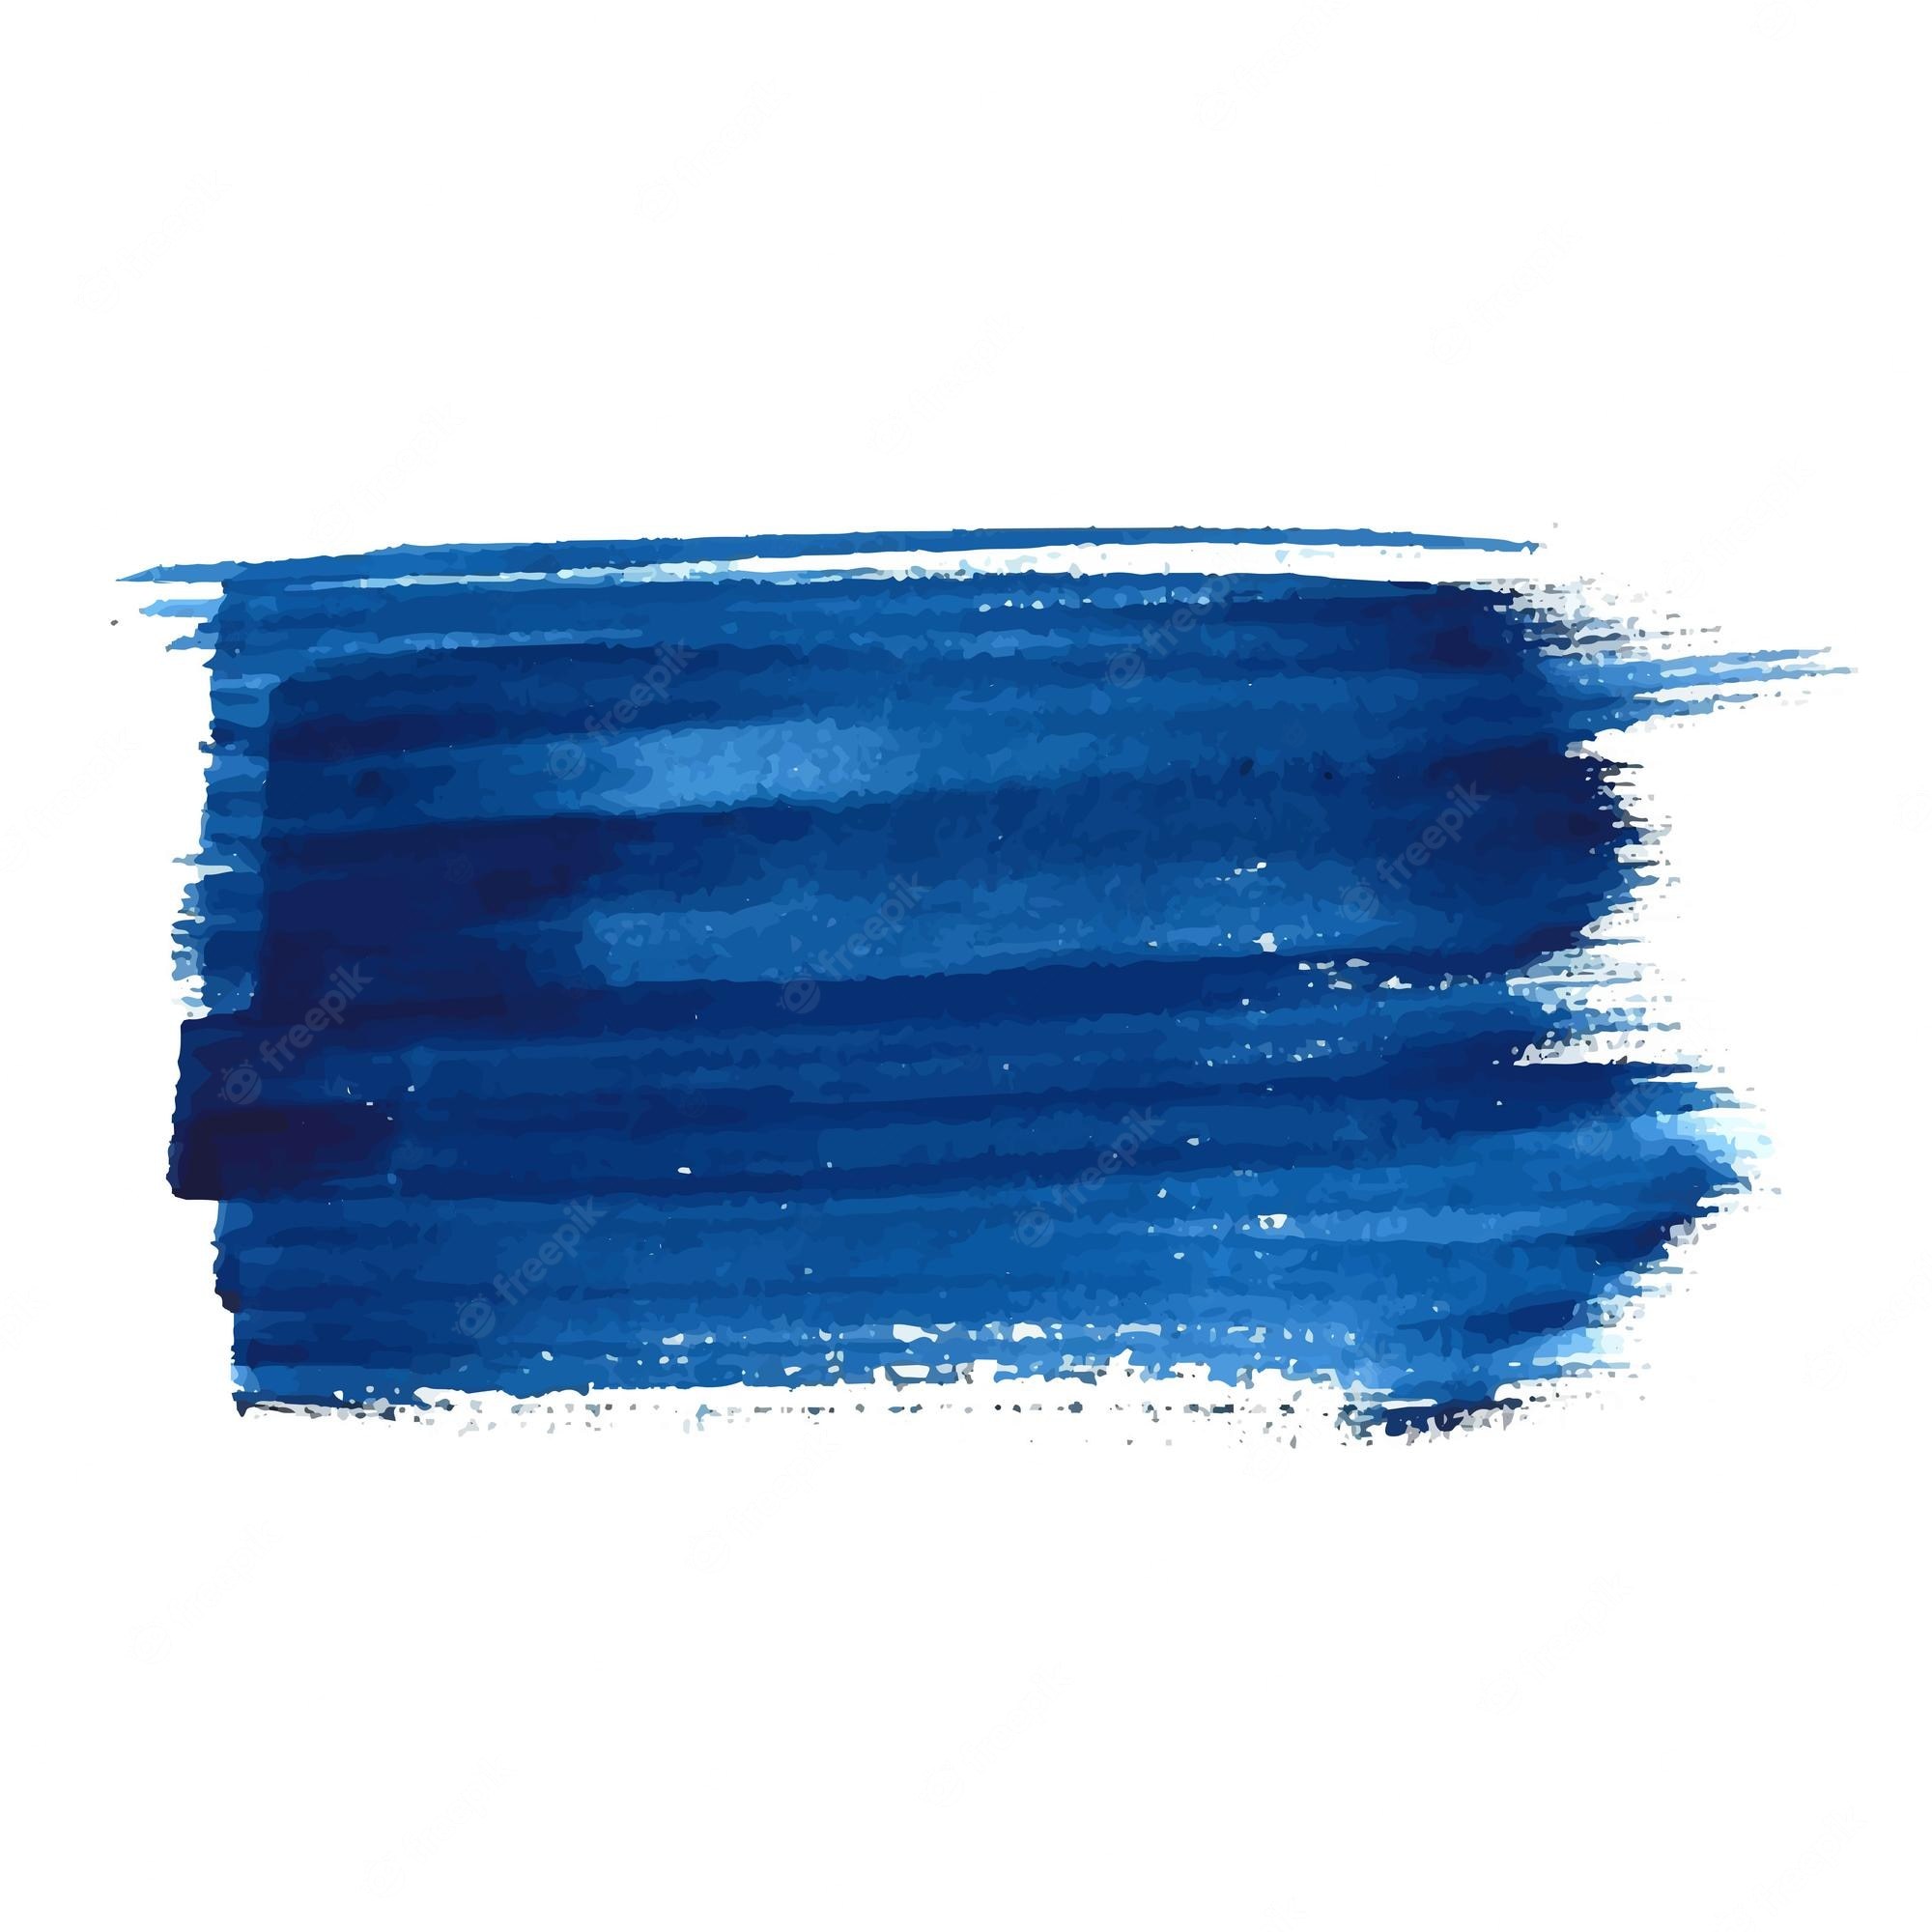 Picture of: Blue Brush Stroke Images – Free Download on Freepik